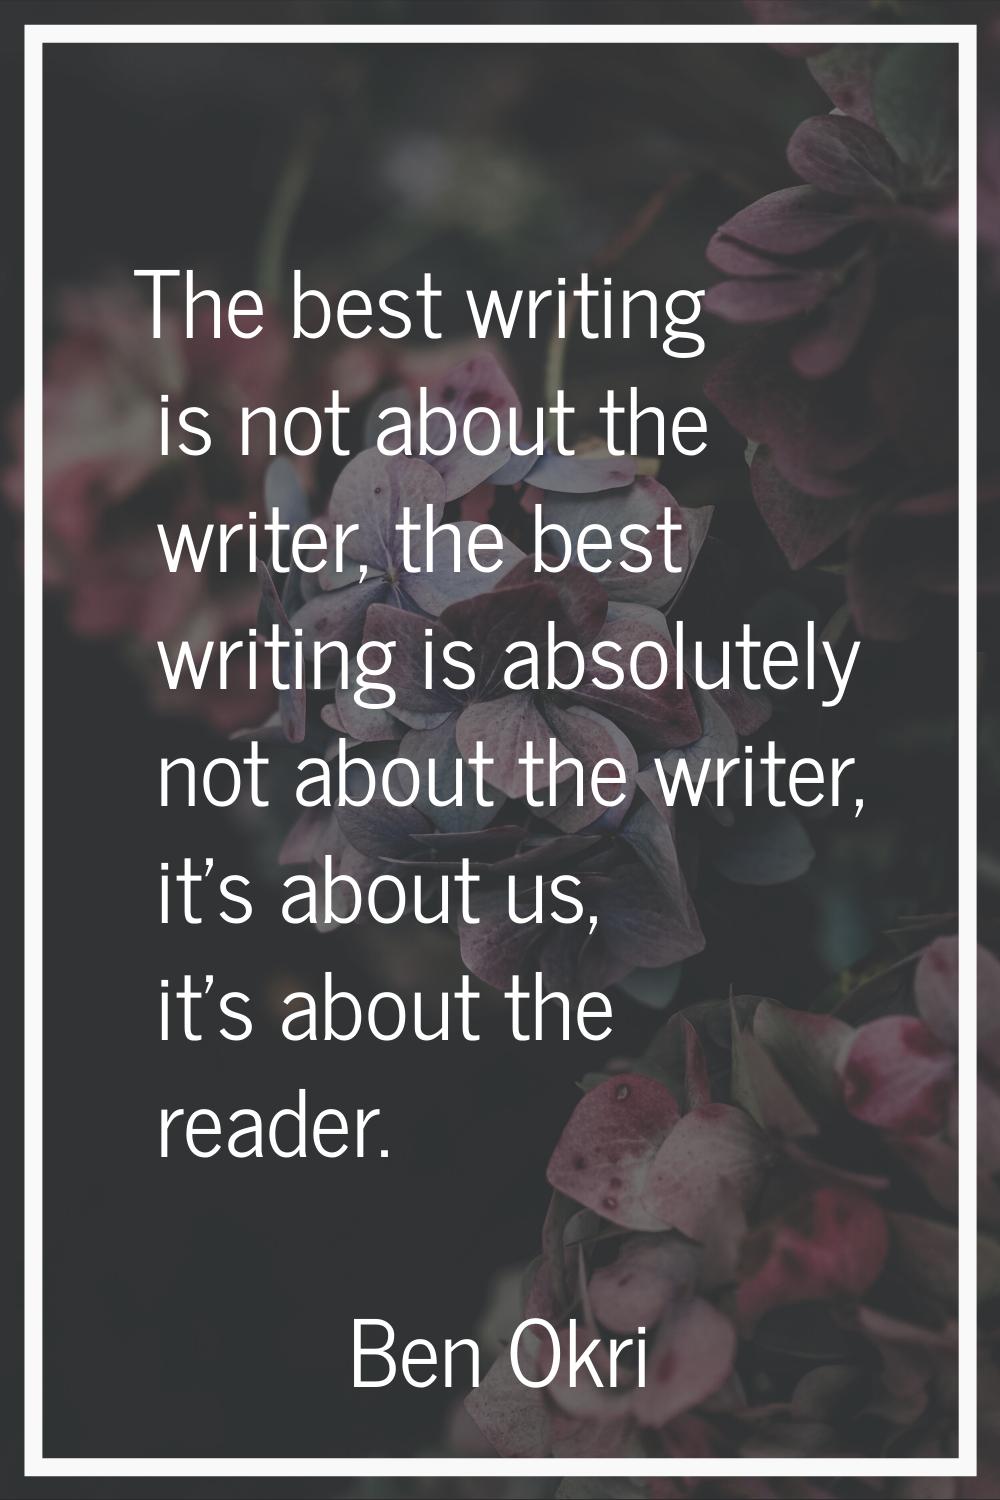 The best writing is not about the writer, the best writing is absolutely not about the writer, it's